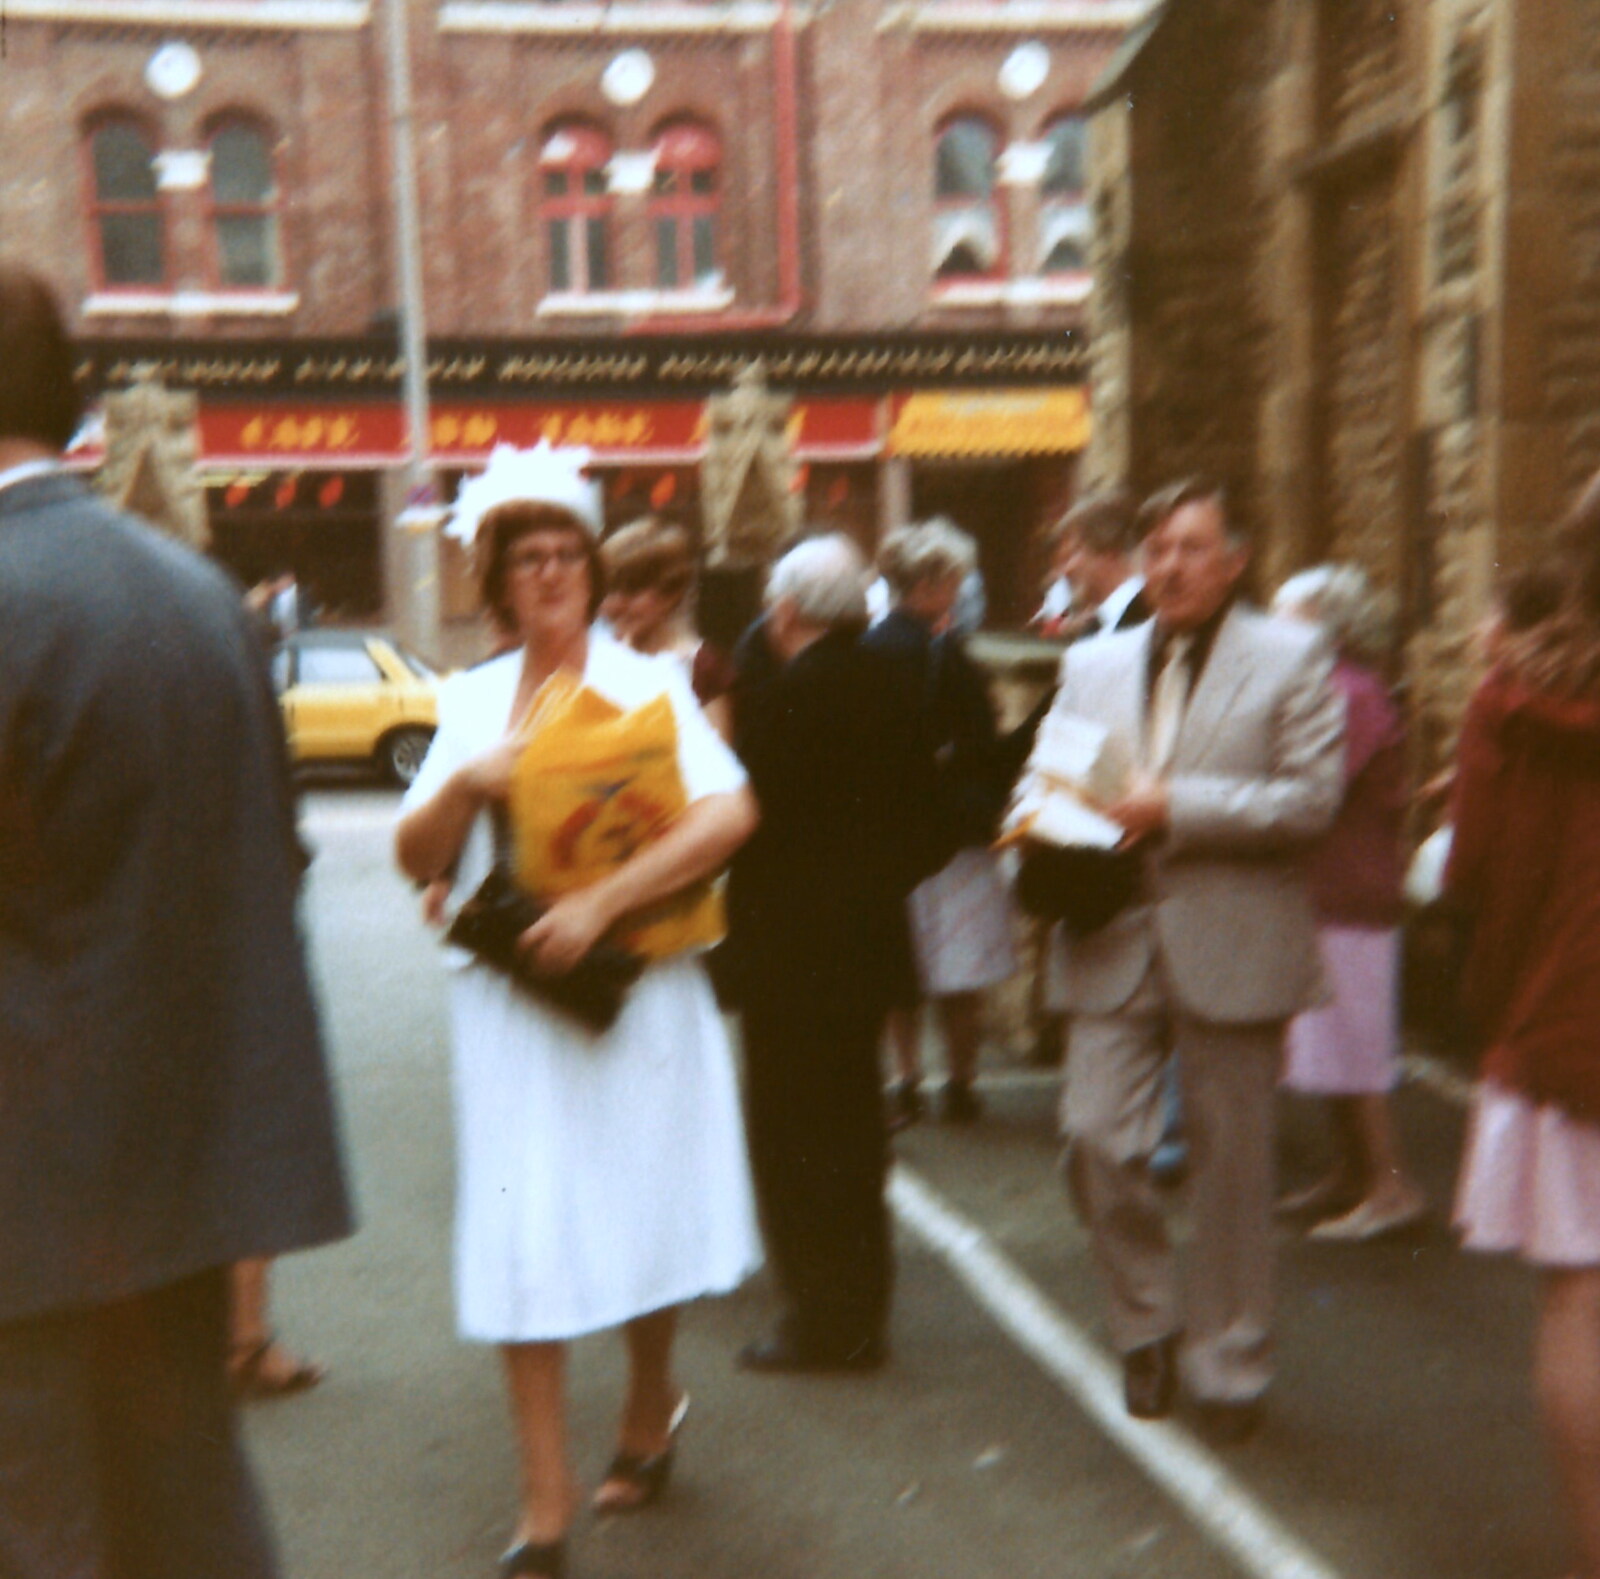 Family History: The 1960s - 24th January 2020: Guests arrive for a wedding somewhere